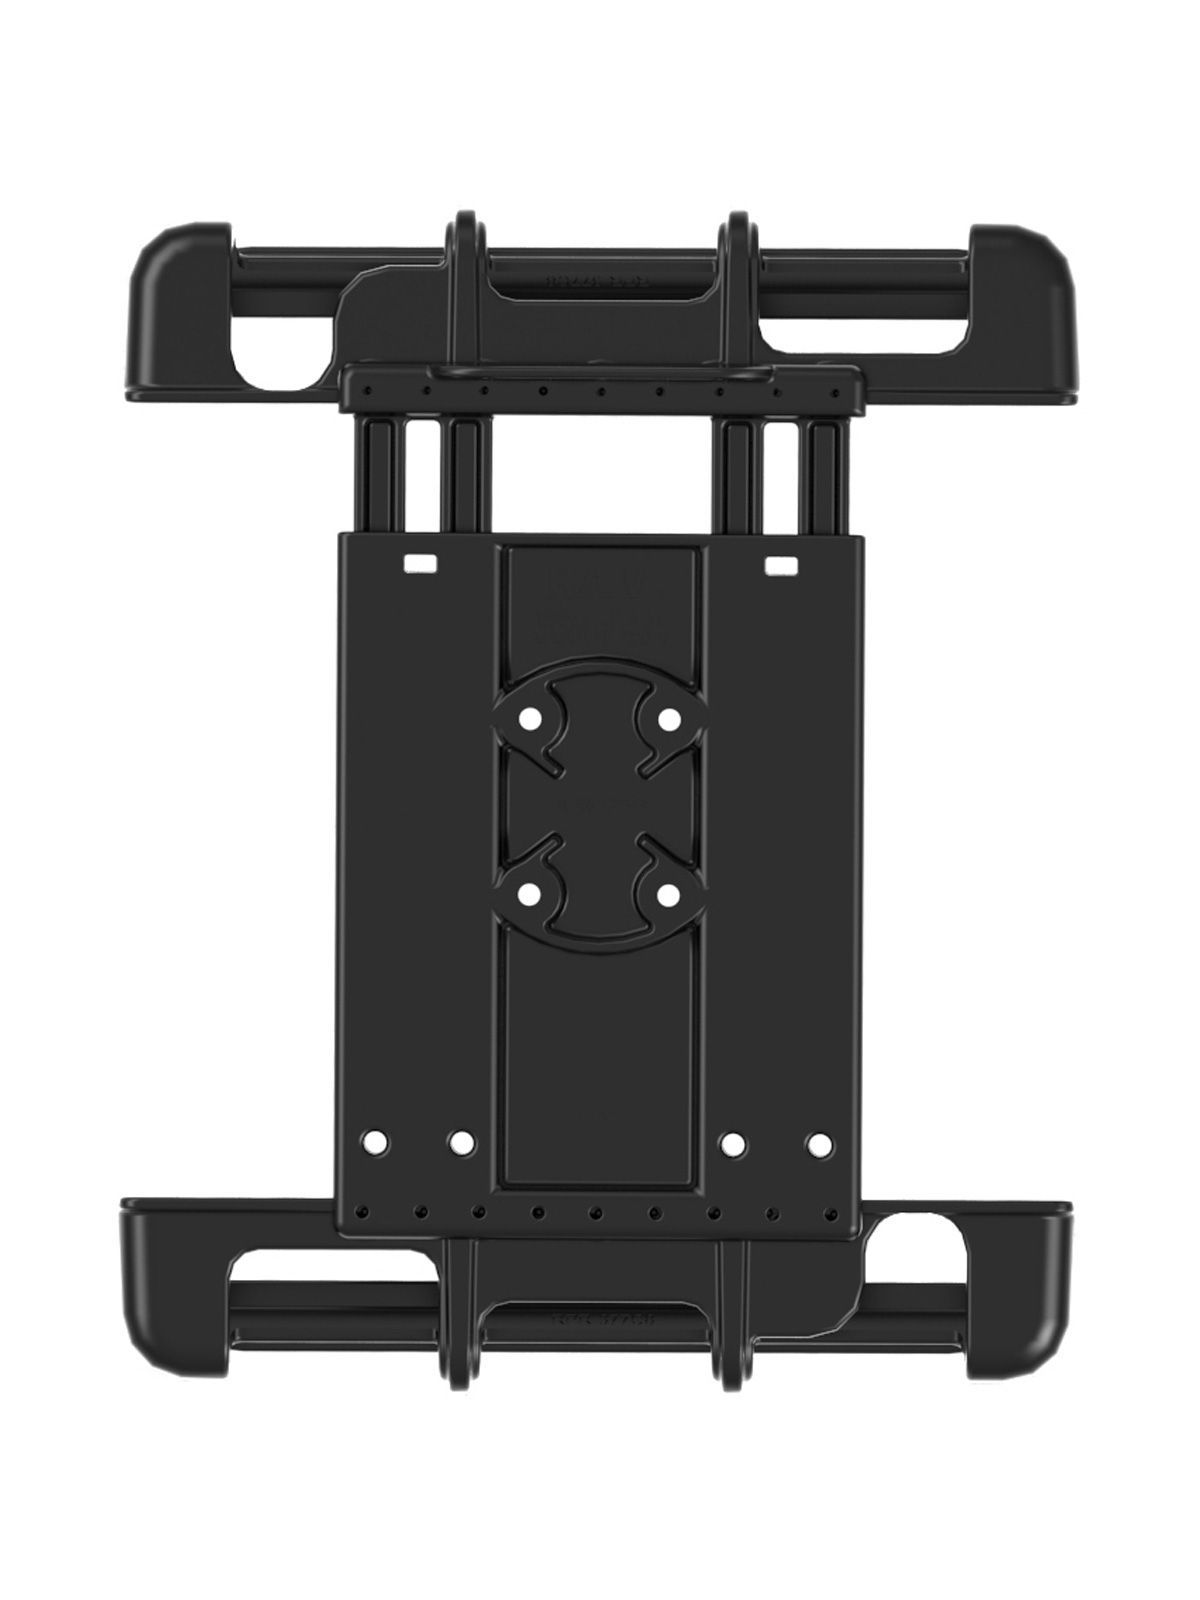 RAM MOUNTS Universal Tab-Tite Clamping Cradle for 10" Tablets (incl. heavy duty cases)